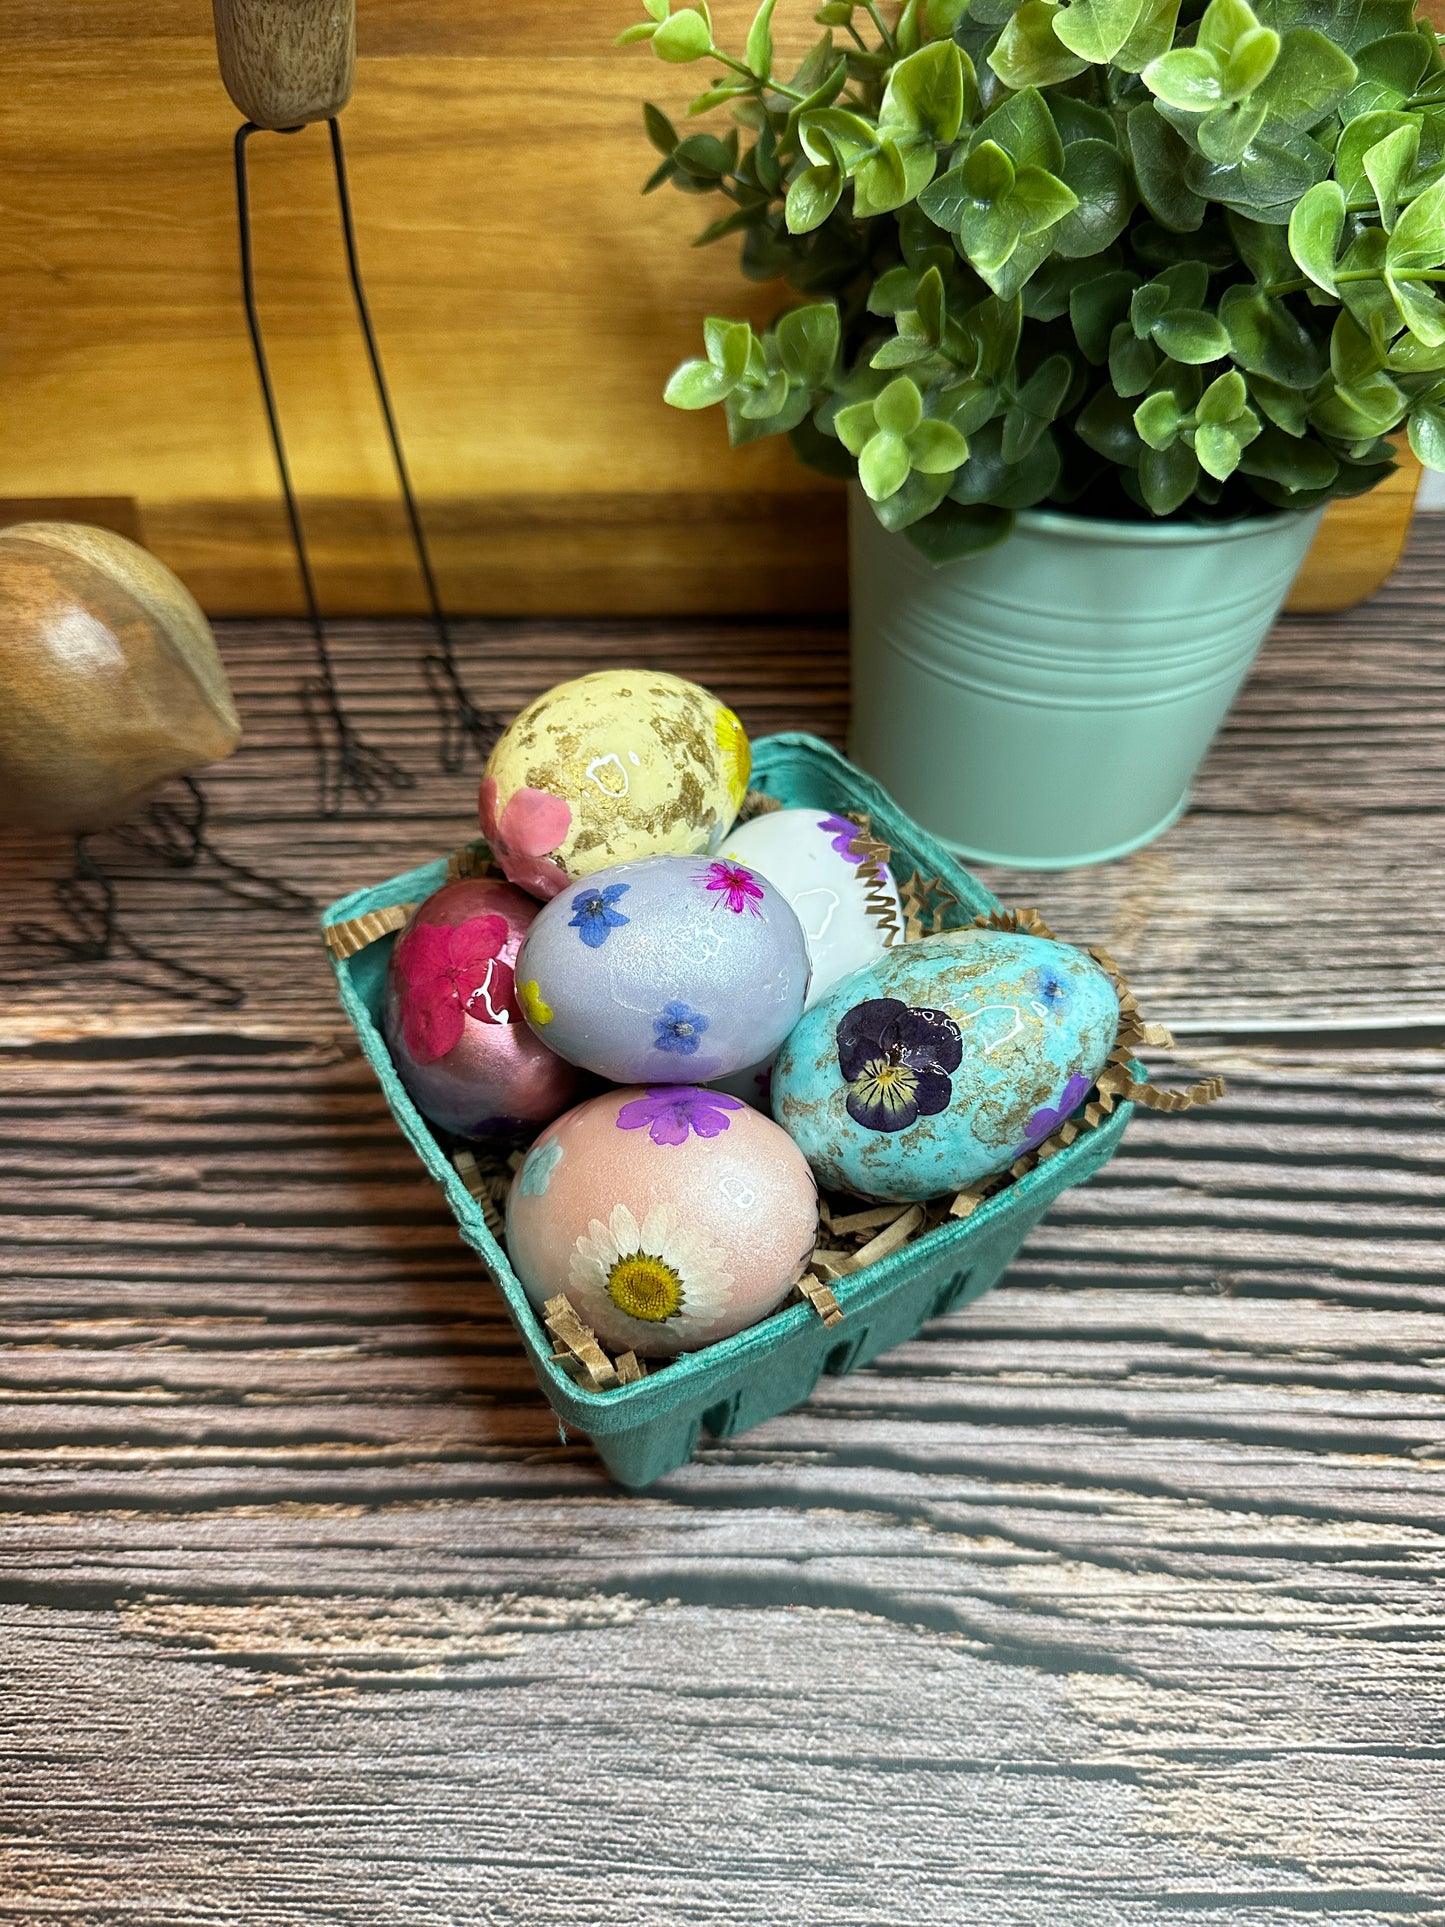 Fancy Easter Egg Decor with Pressed Flowers